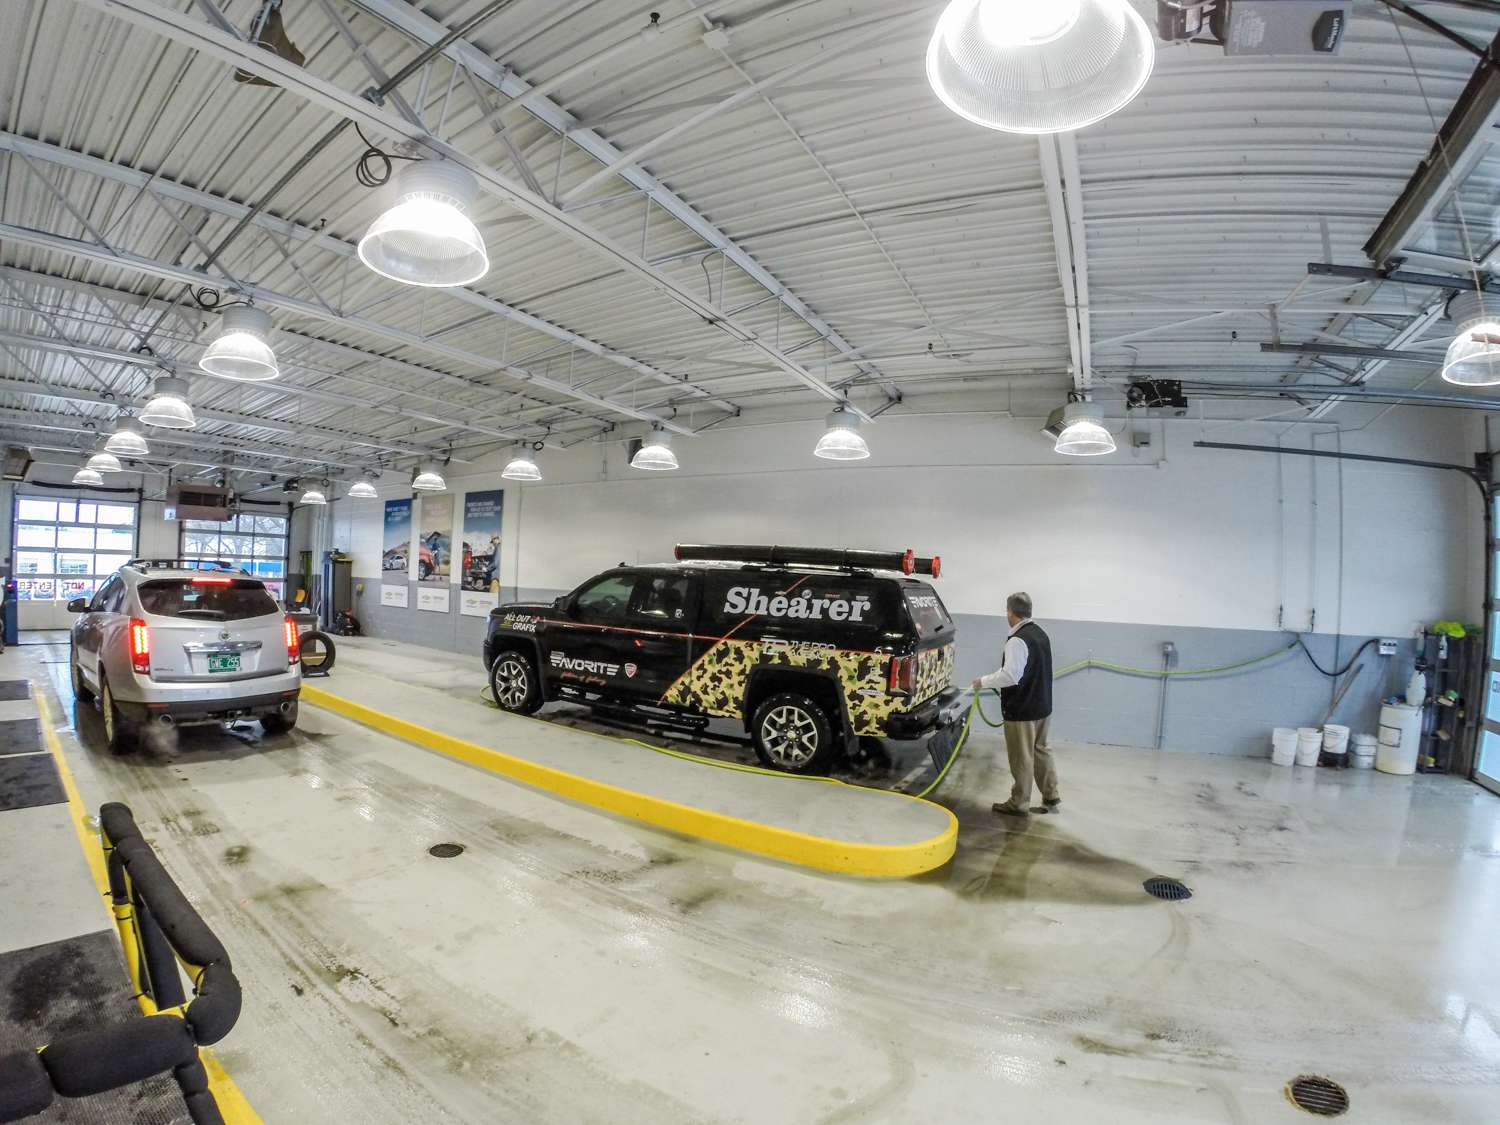 Last but not least the ride gets a bath at Shearer Chevrolet/Buick/GMC/Cadillac, a dealer in Burlington. The dealership is a sponsor of Harris. 
